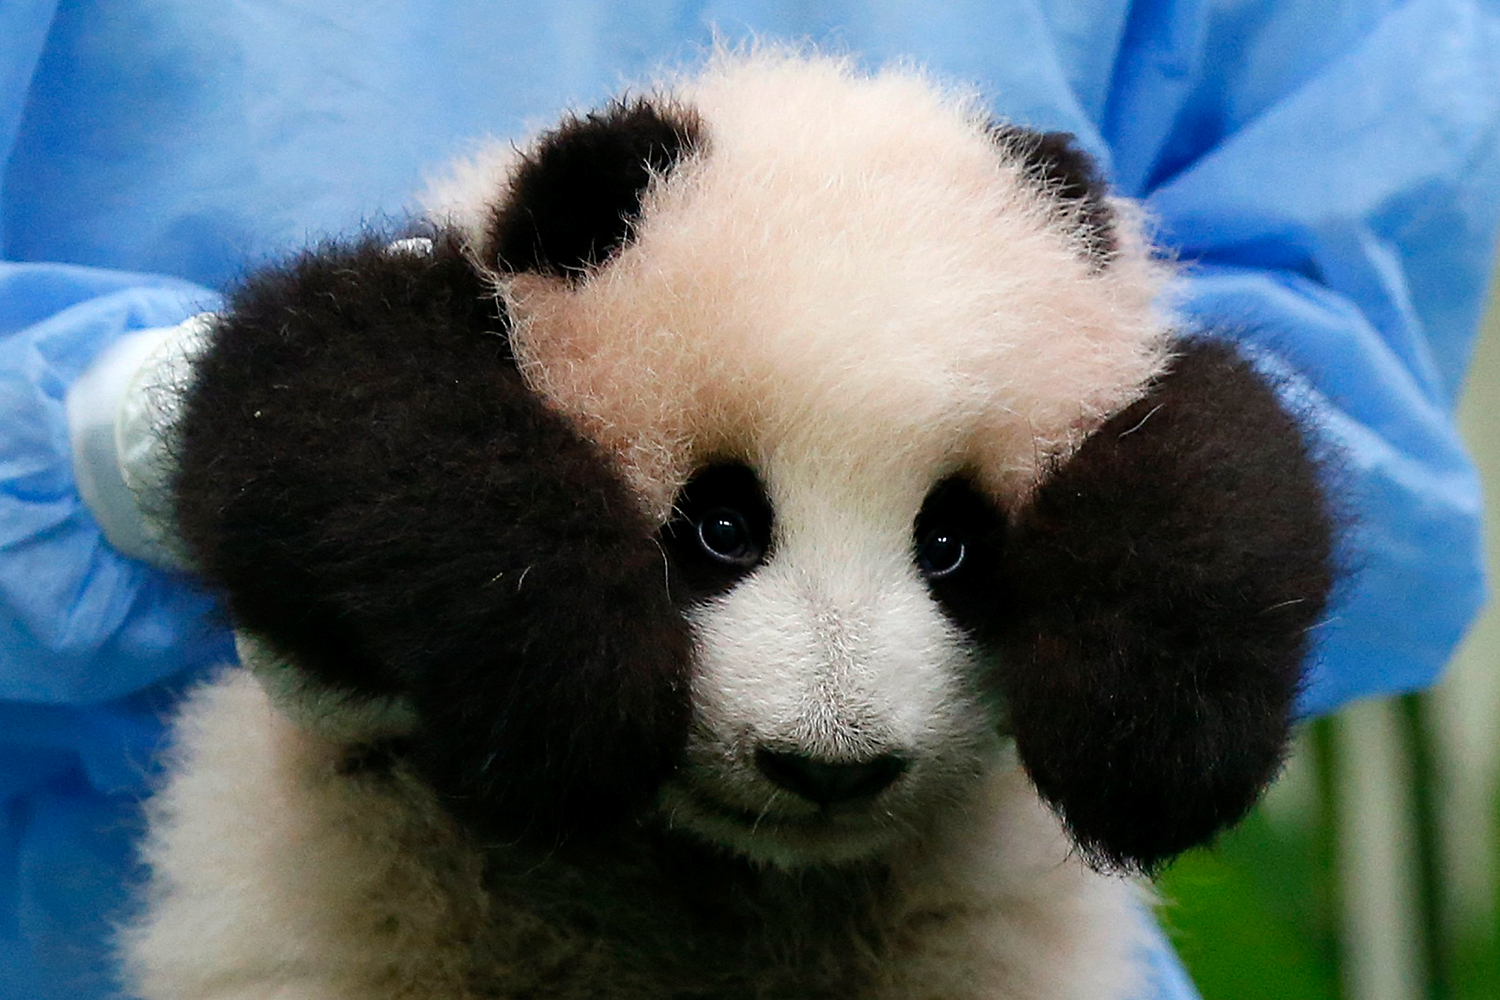 Malaysian baby panda shown for the first time